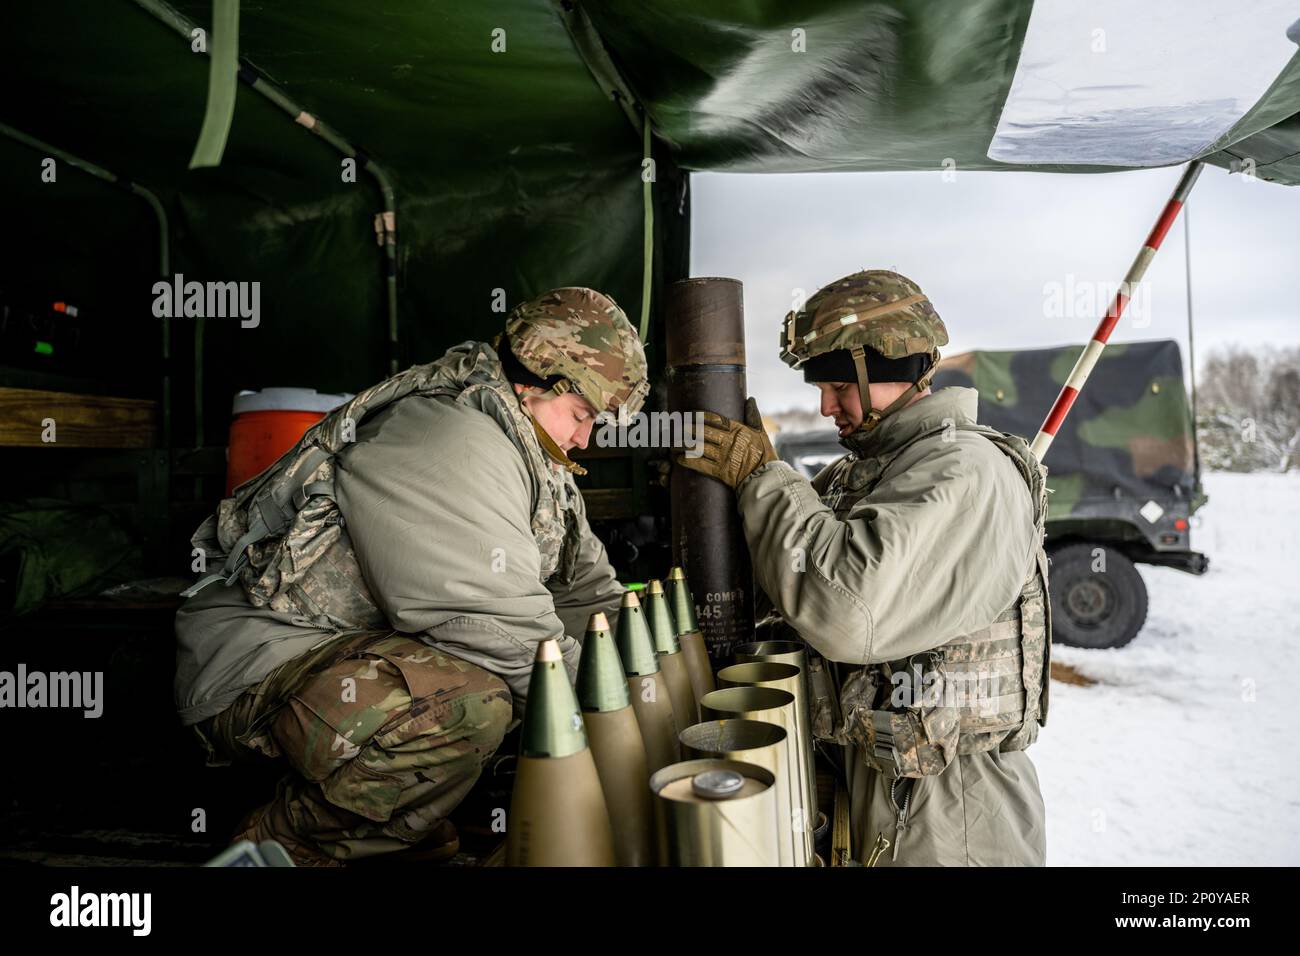 Army Cpl. Brady Kielpikowski and Pfc. Dominic Tilton, 1-120th Field Artillery Regiment, assemble a 105mm High Explosive shell to be used with the M119 howitzer during Northern Strike 23-1, Jan. 23, 2023, at Camp Grayling, Mich. Units that participate in Northern Strike’s winter iteration build readiness by conducting joint, cold-weather training designed to meet objectives of the Department of Defense’s Arctic Strategy. Stock Photo